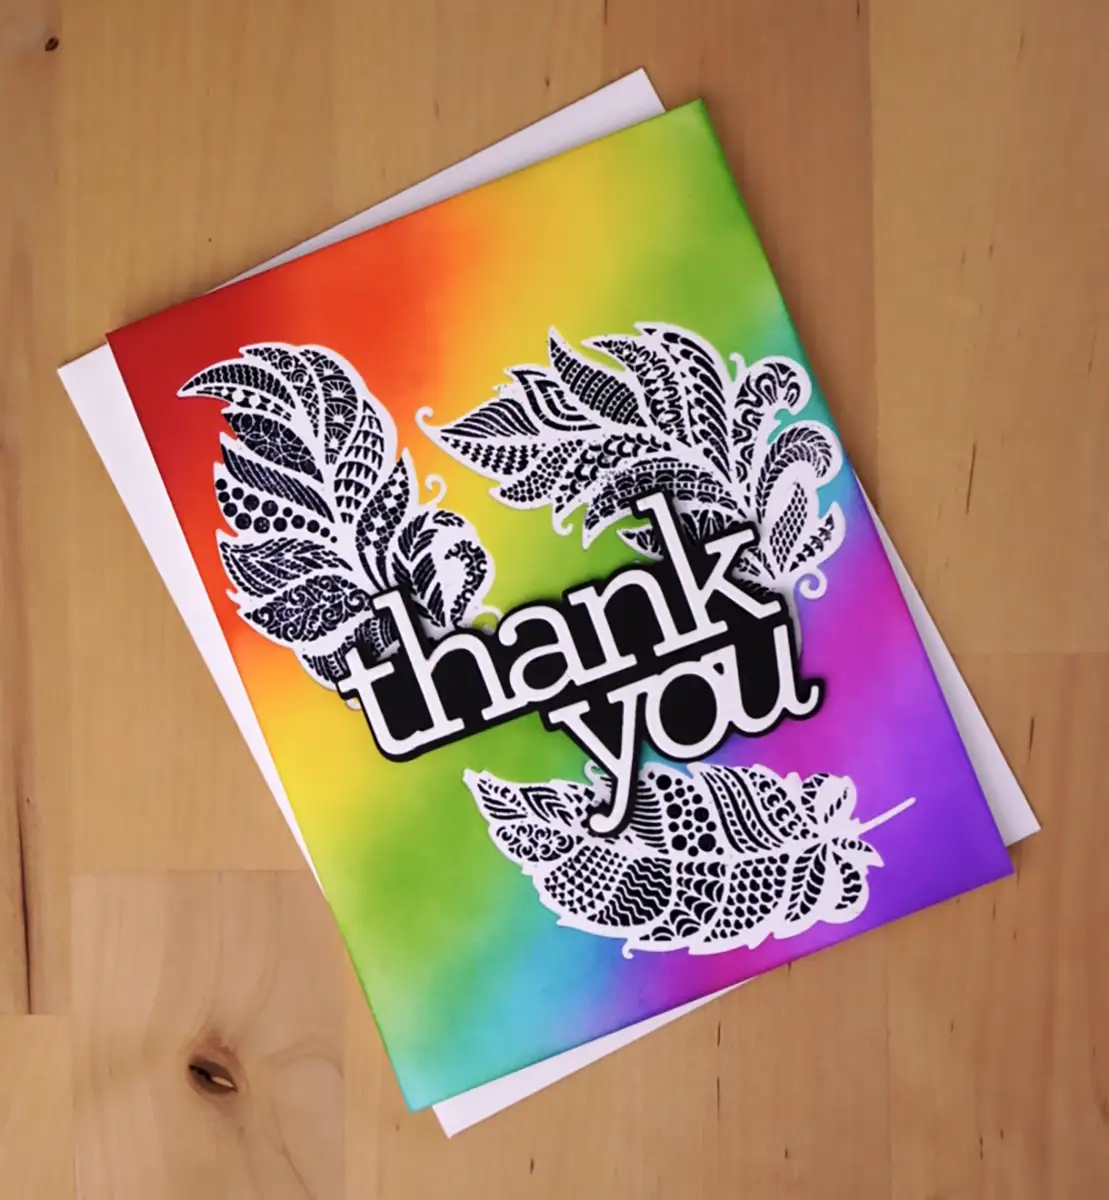 A thank you card with feathers on it, created using the innovative technique of 3 Cards From 1 Die-cut.